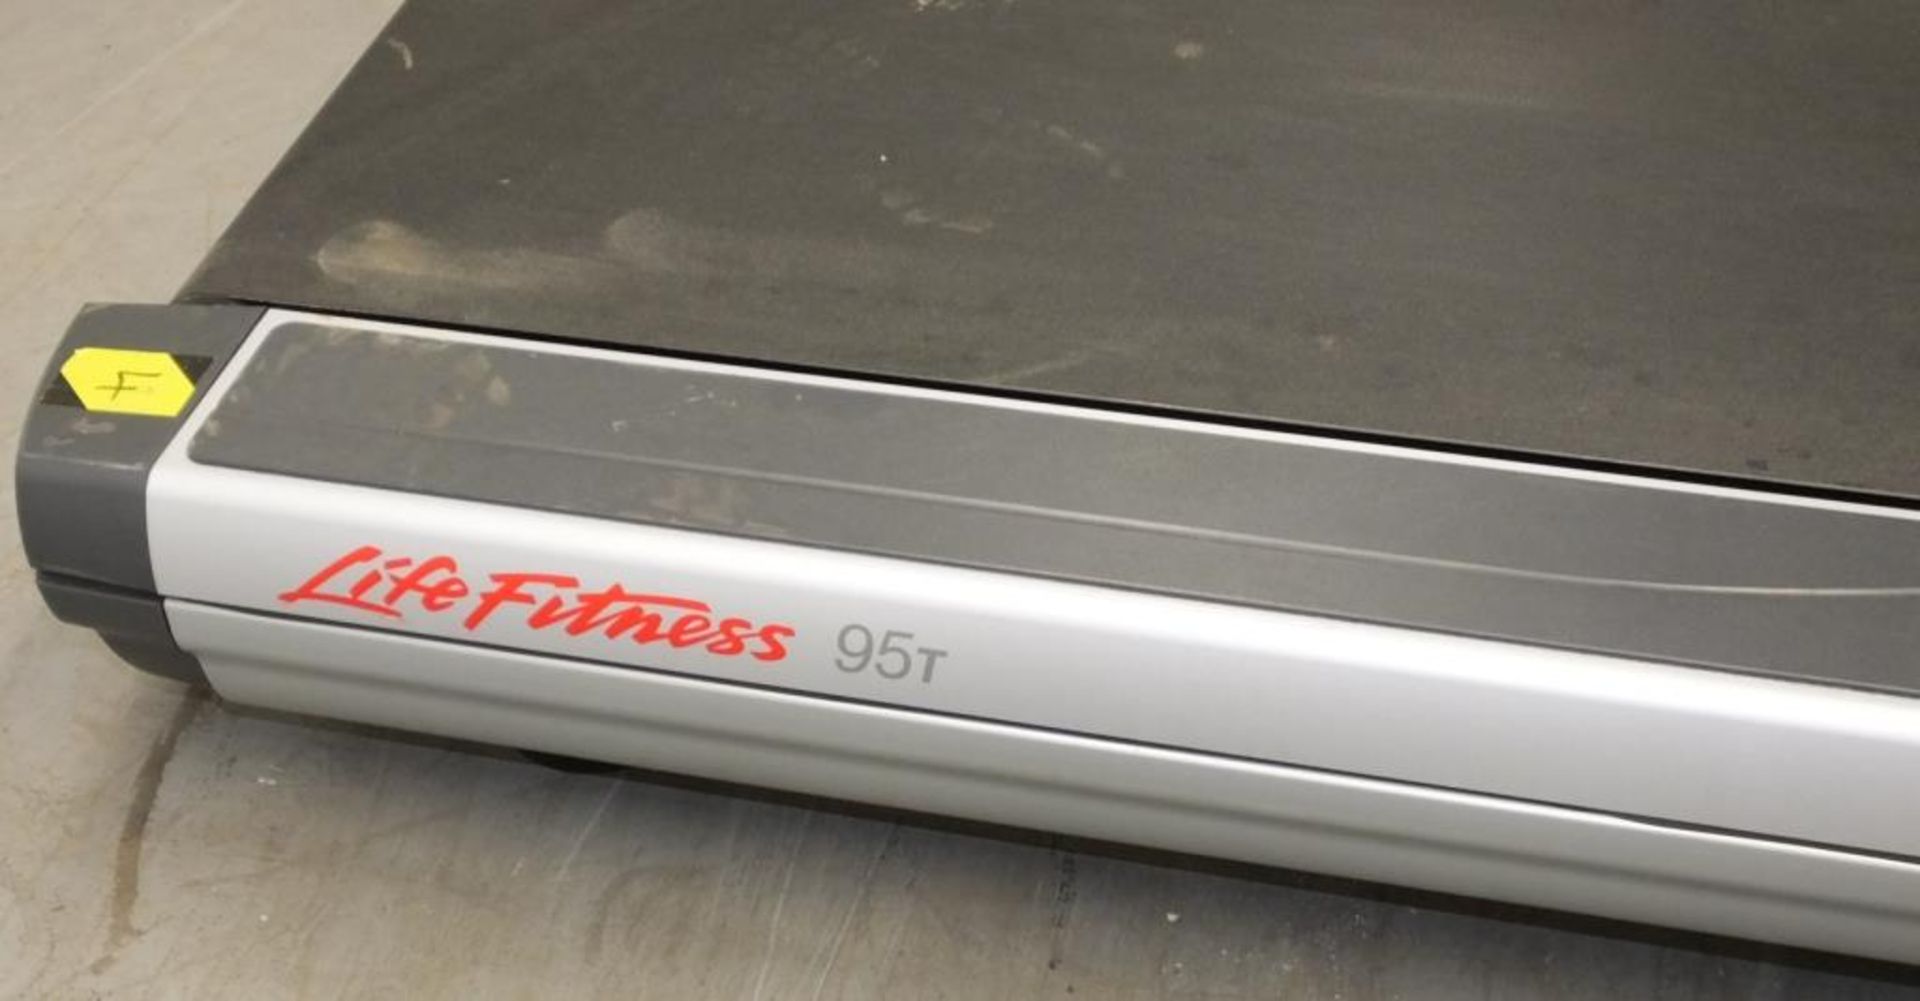 Life Fitness 95T FlexDeck shock absorption system treadmill - powers up - functionality untested - Image 6 of 20